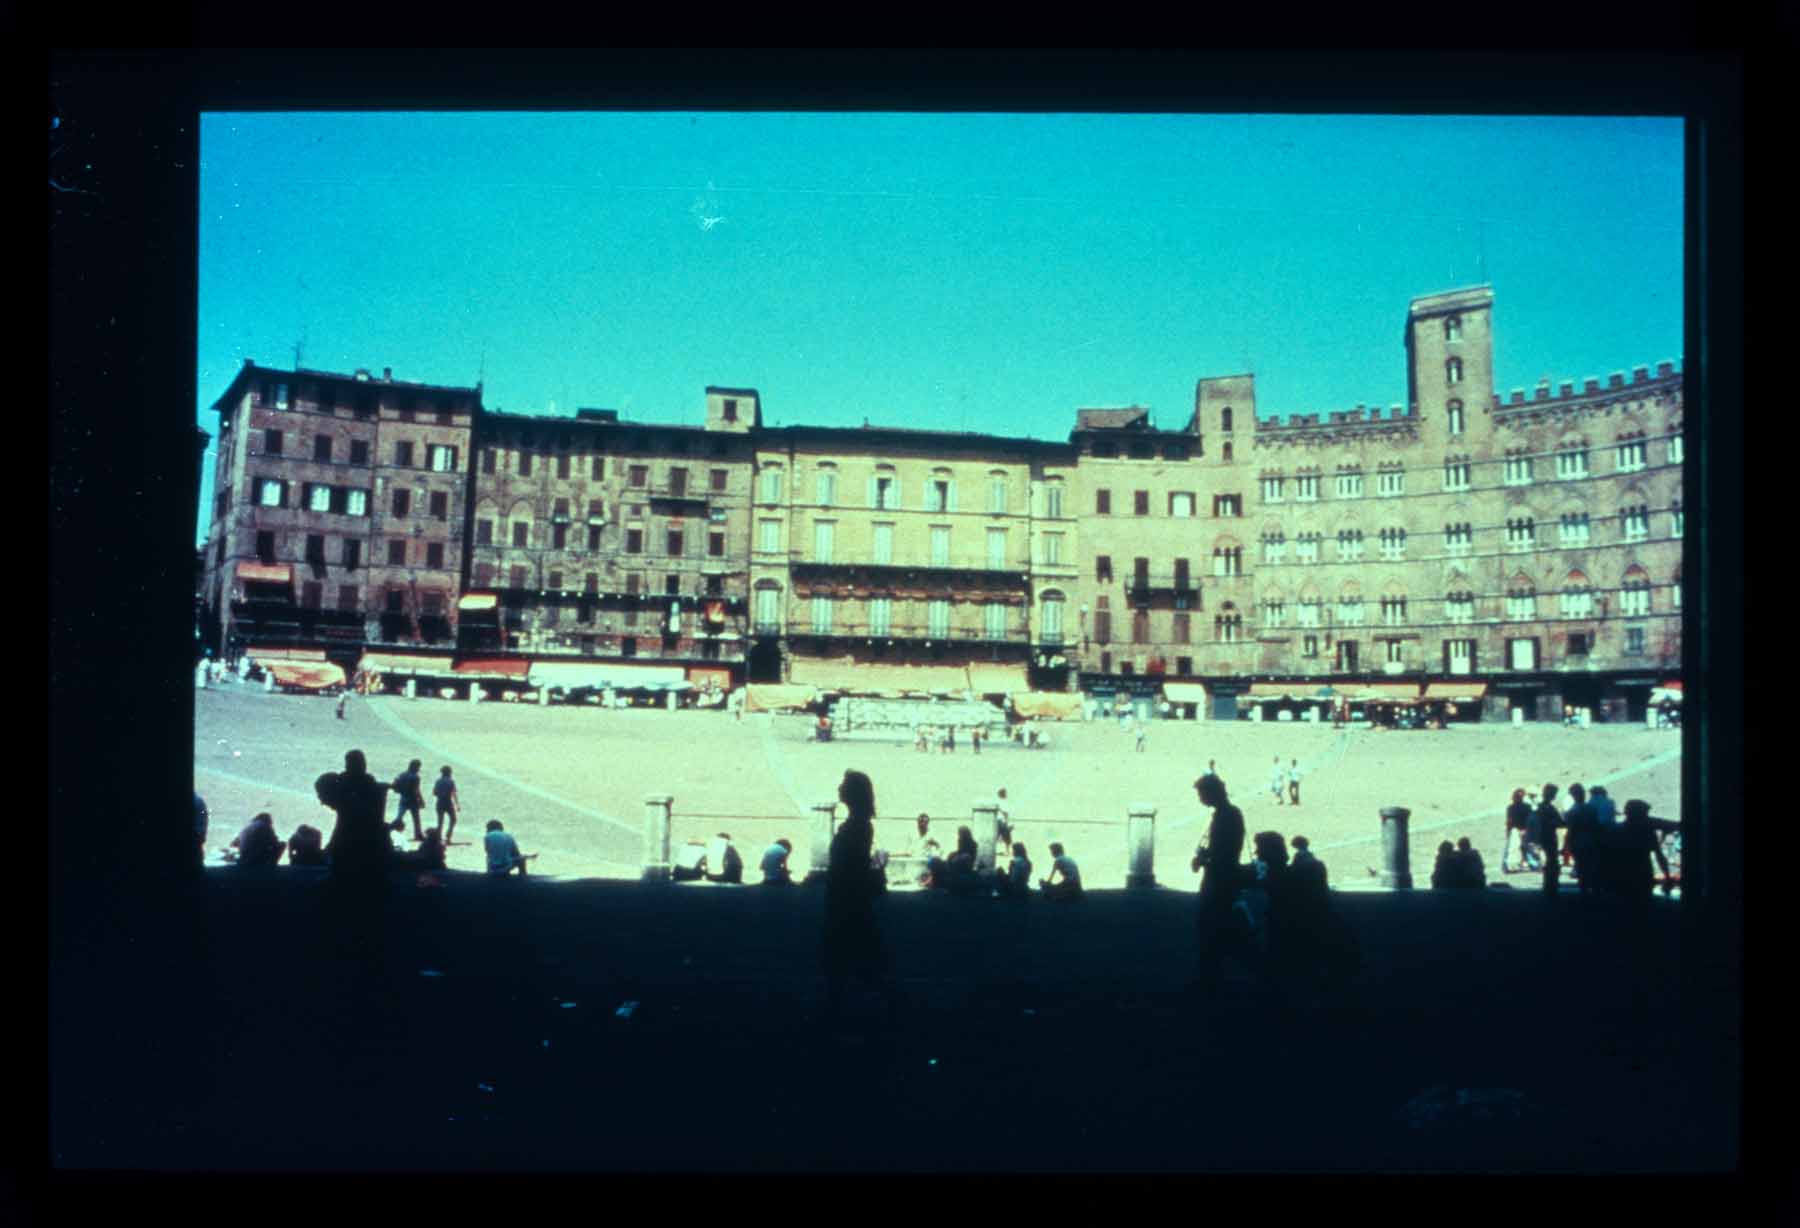 The Campo In Siena, Tuscany